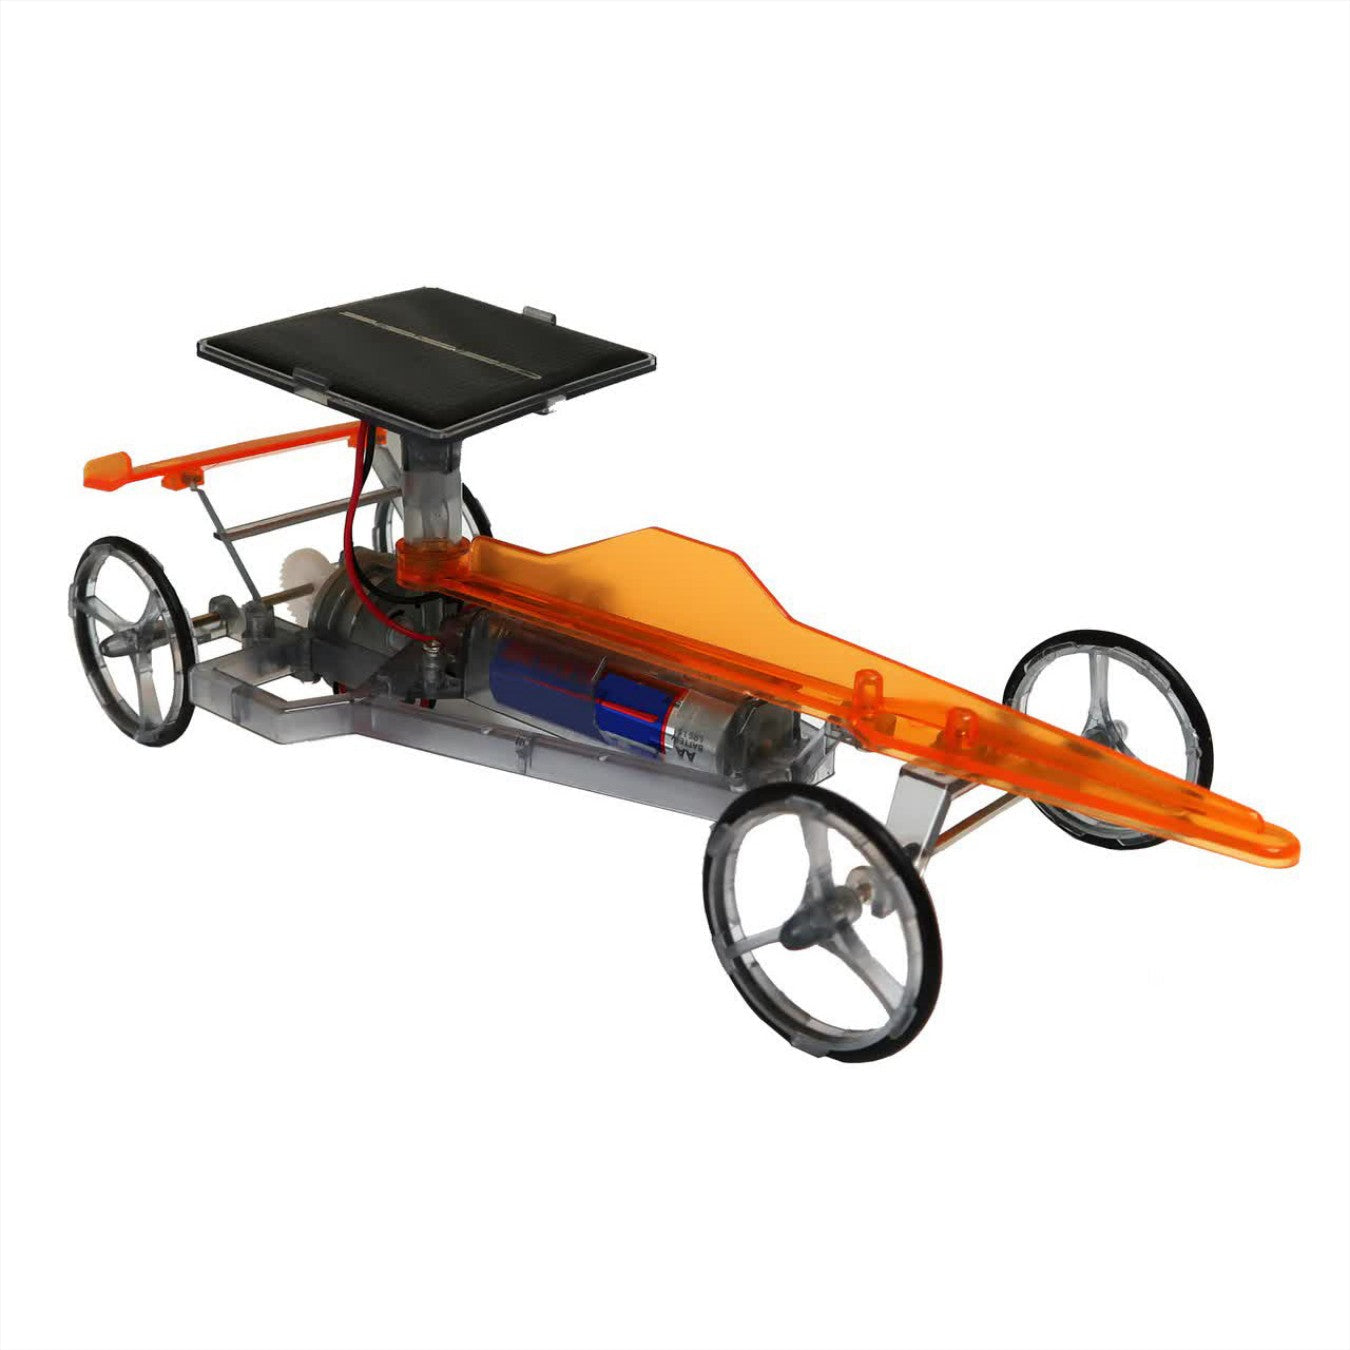 Robotikits: Solar/Battery Top Fuel Dragster